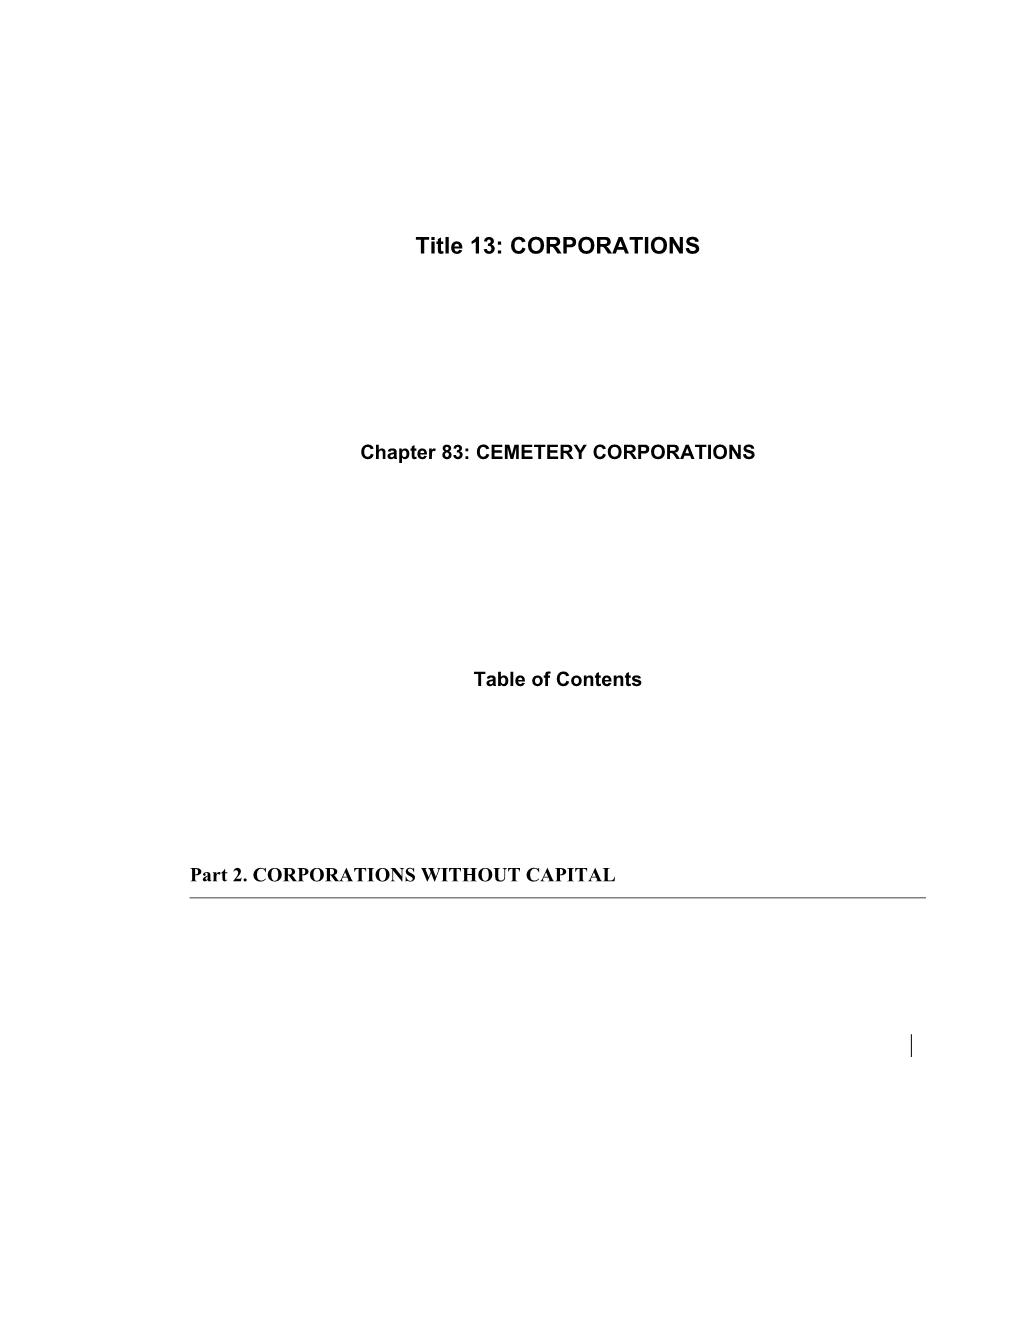 MRS Title 13, Chapter83: CEMETERY CORPORATIONS